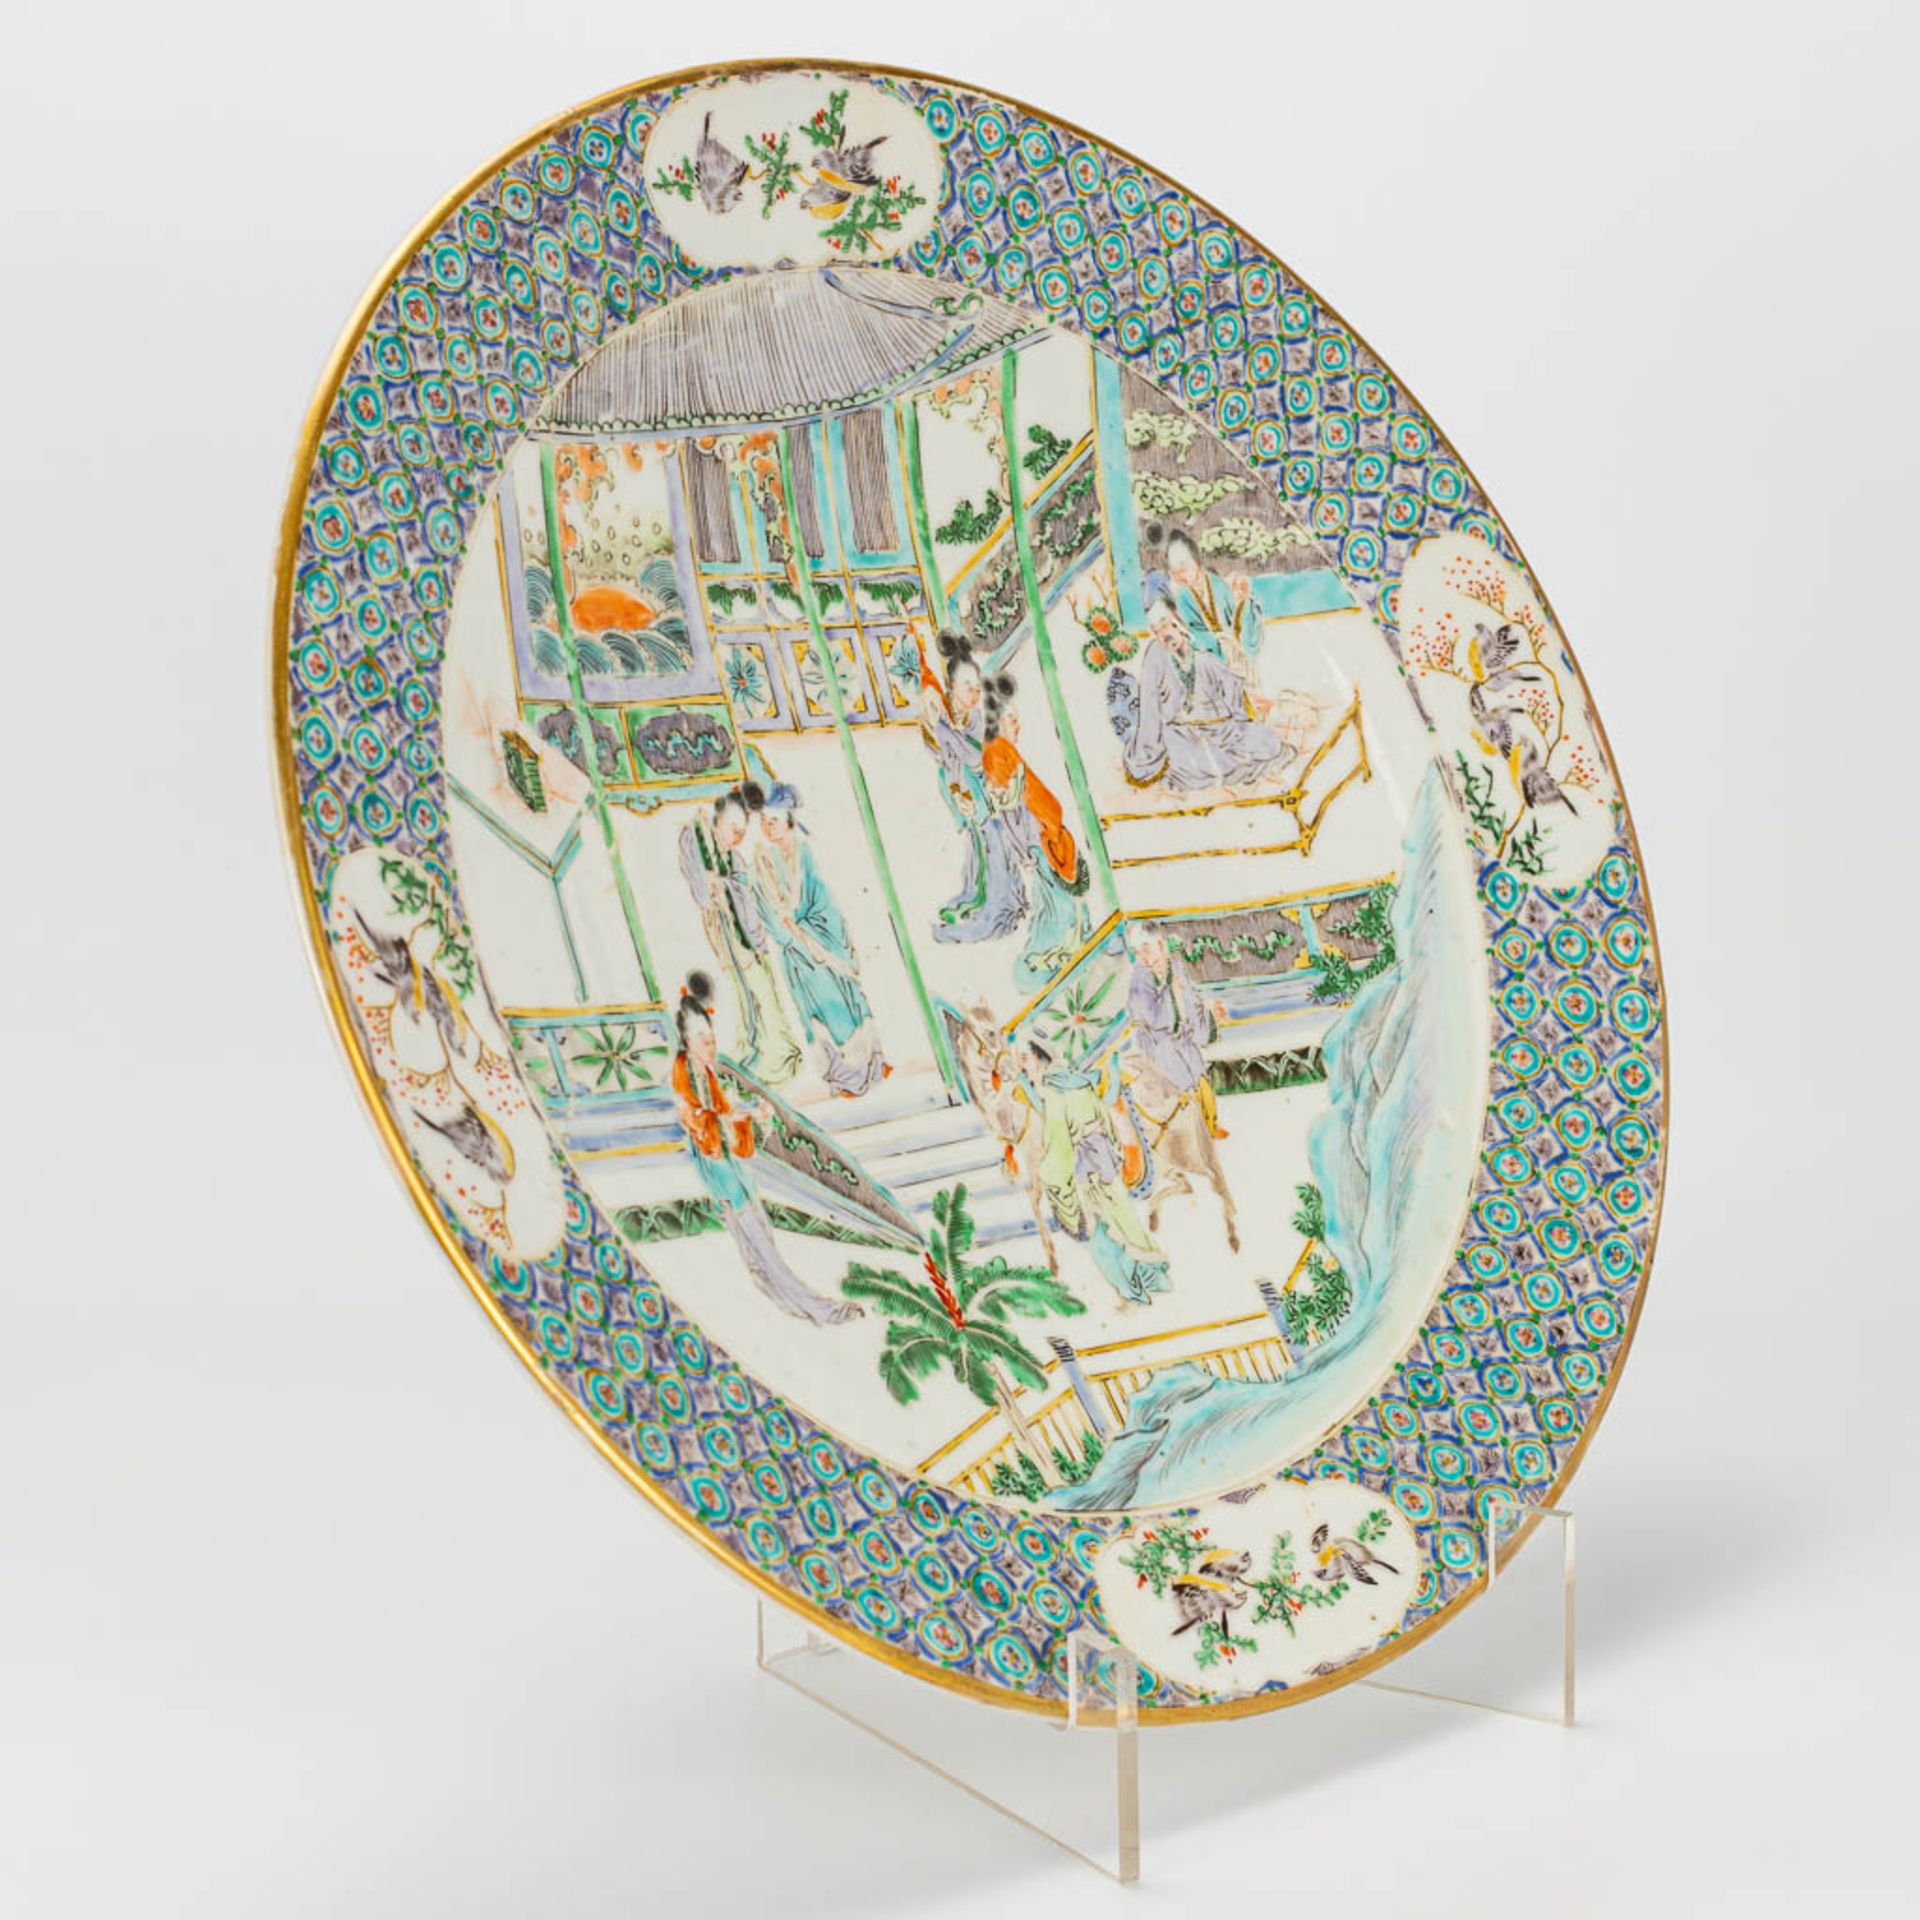 A pair of plates made of Chinese porcelain in Kanton style. 19th century. - Image 10 of 24